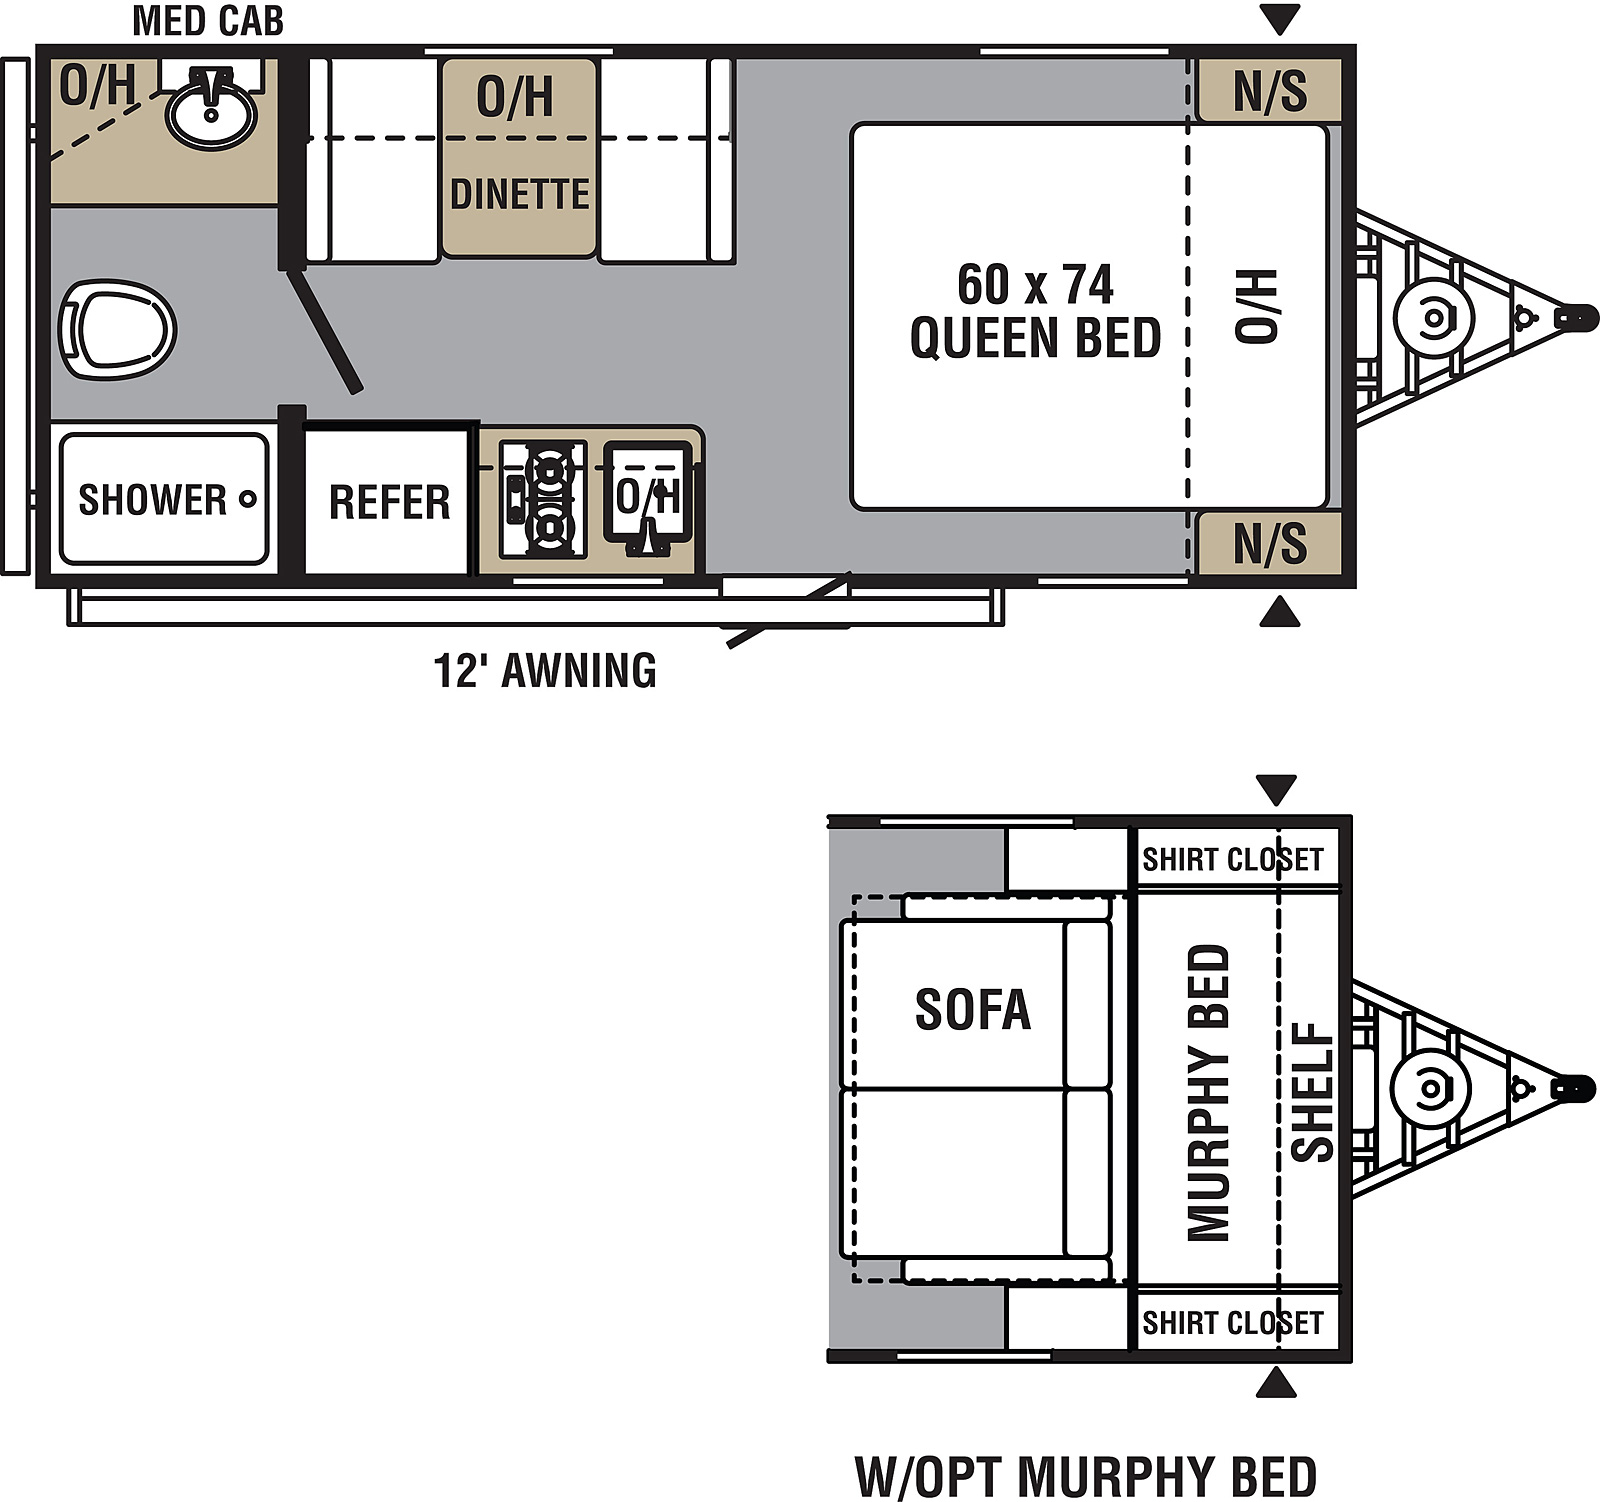 Viking Ultra-Lite 17FQ floorplan. The 17FQ has no slide outs and one entry door.